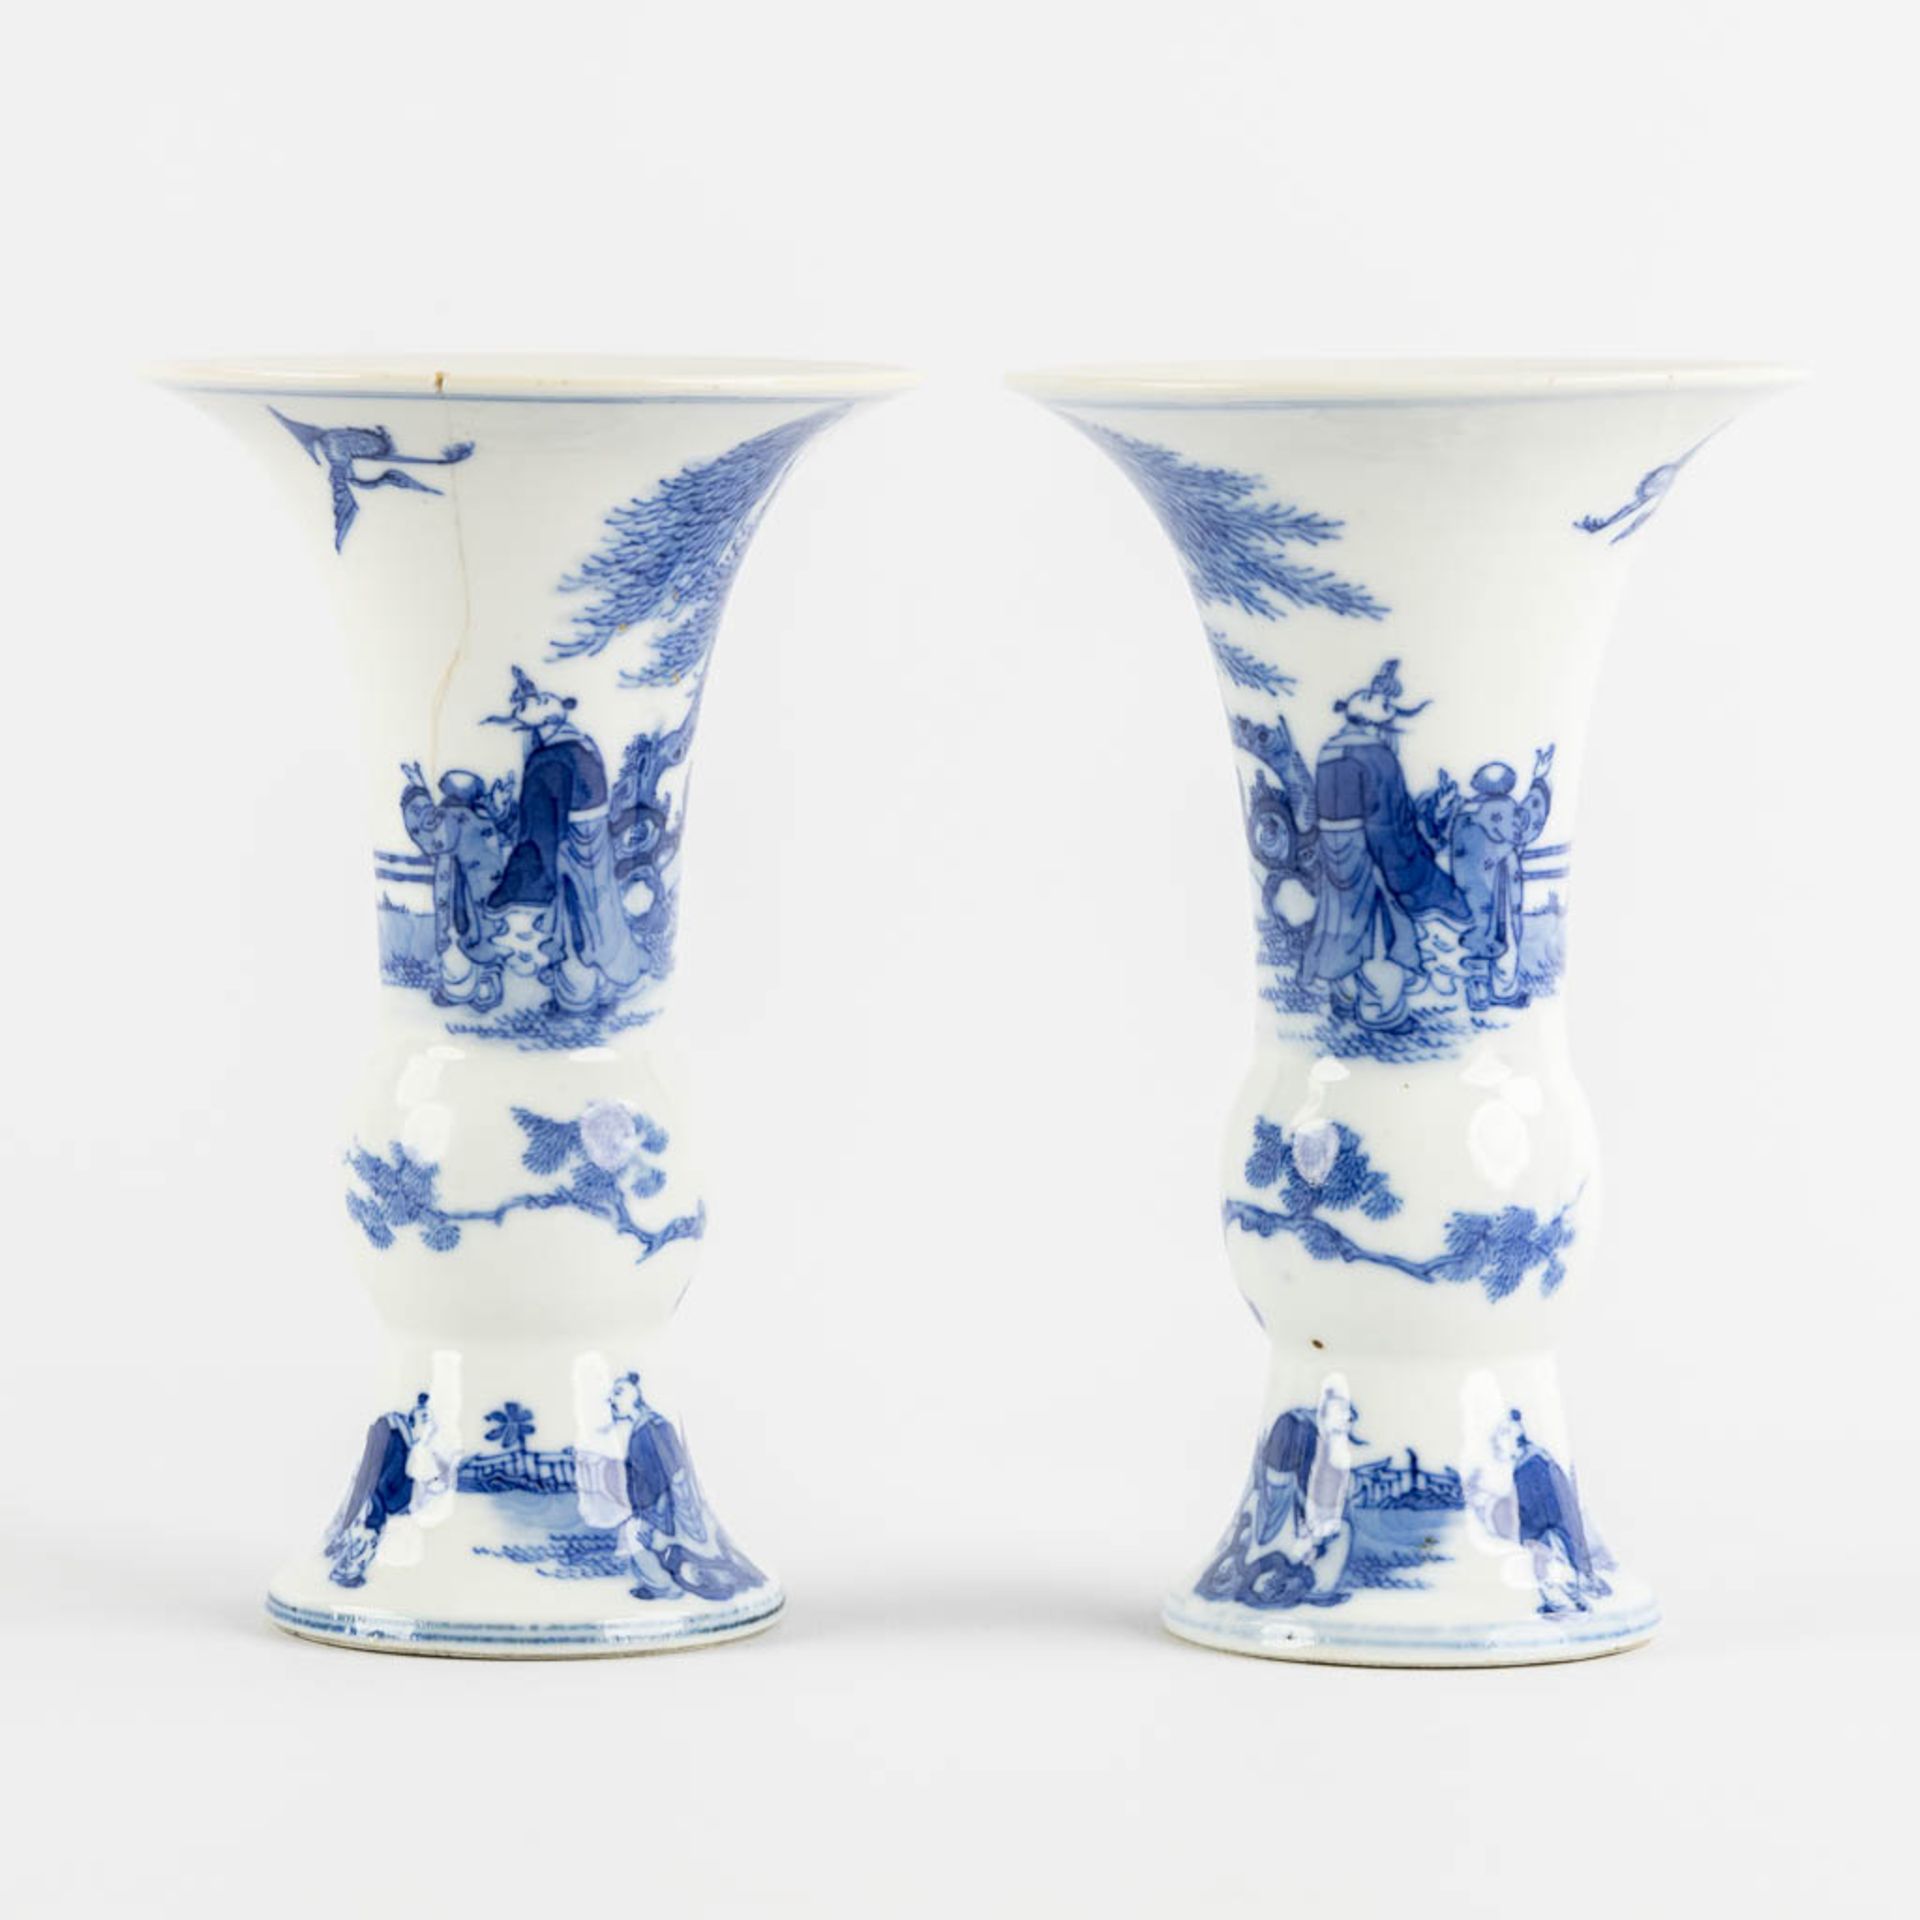 A pair of Chinese 'Gu' vases, blue-white. Marked Yongzheng Reign. 19th/20th C. (H:17 x D:10,5 cm)